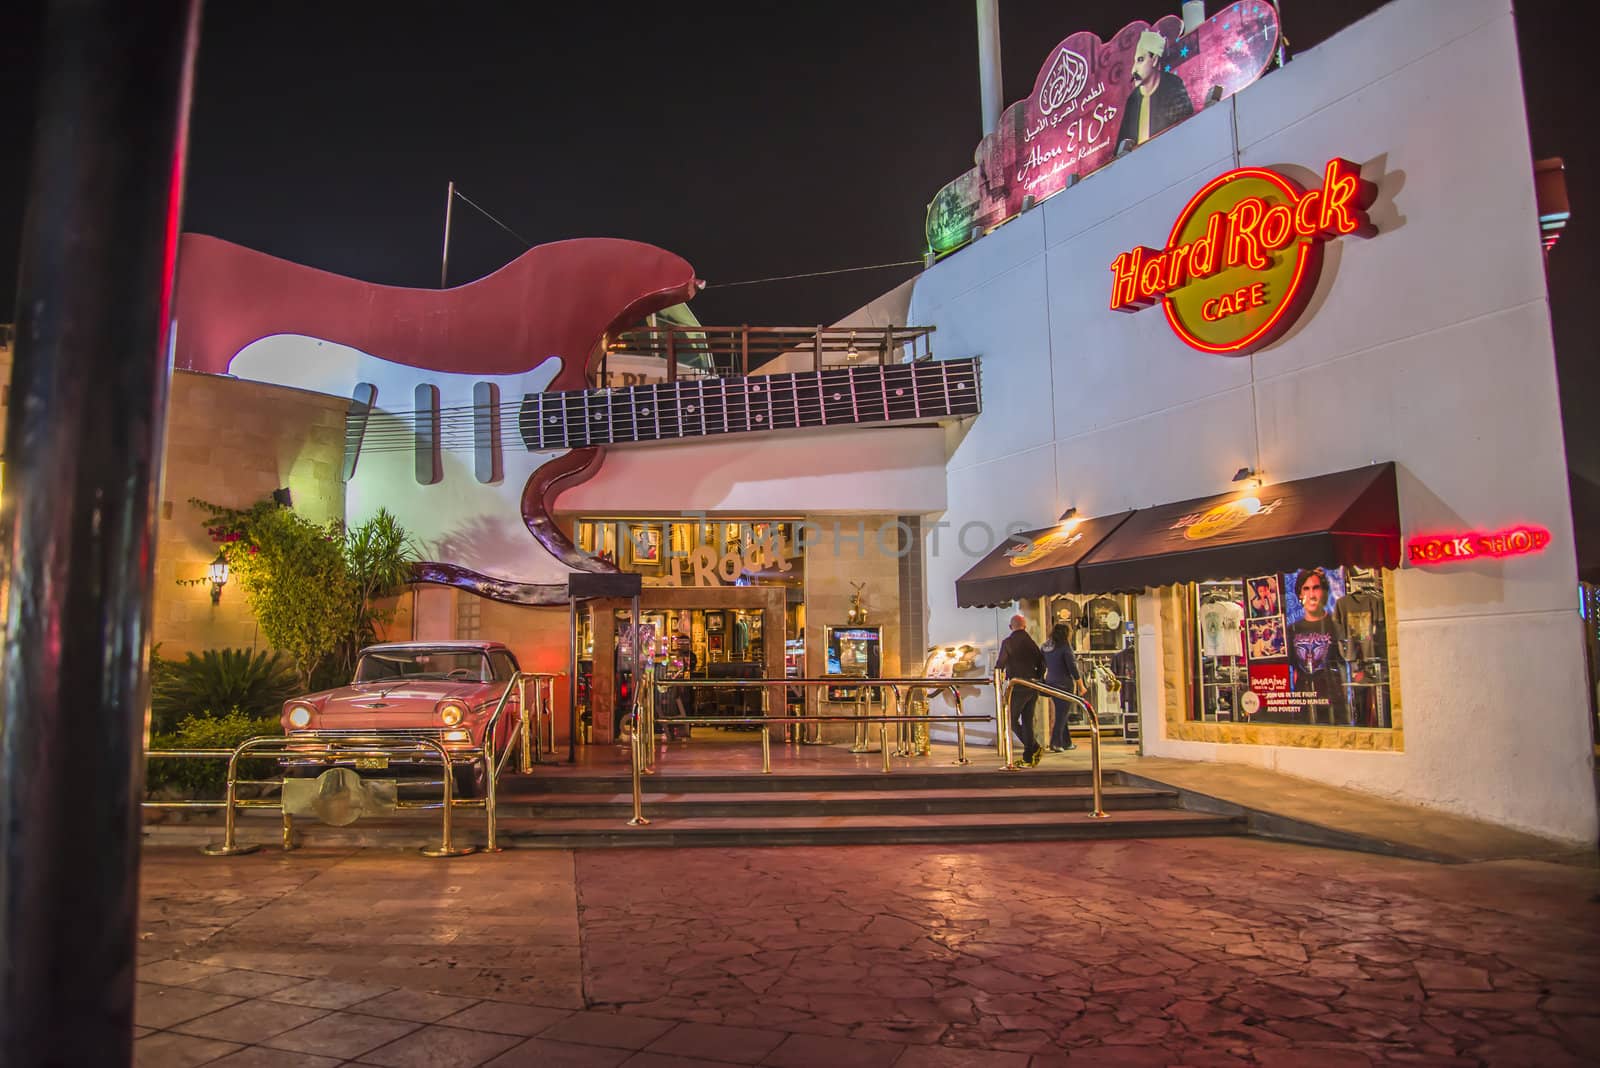 hard rock cafe by steirus